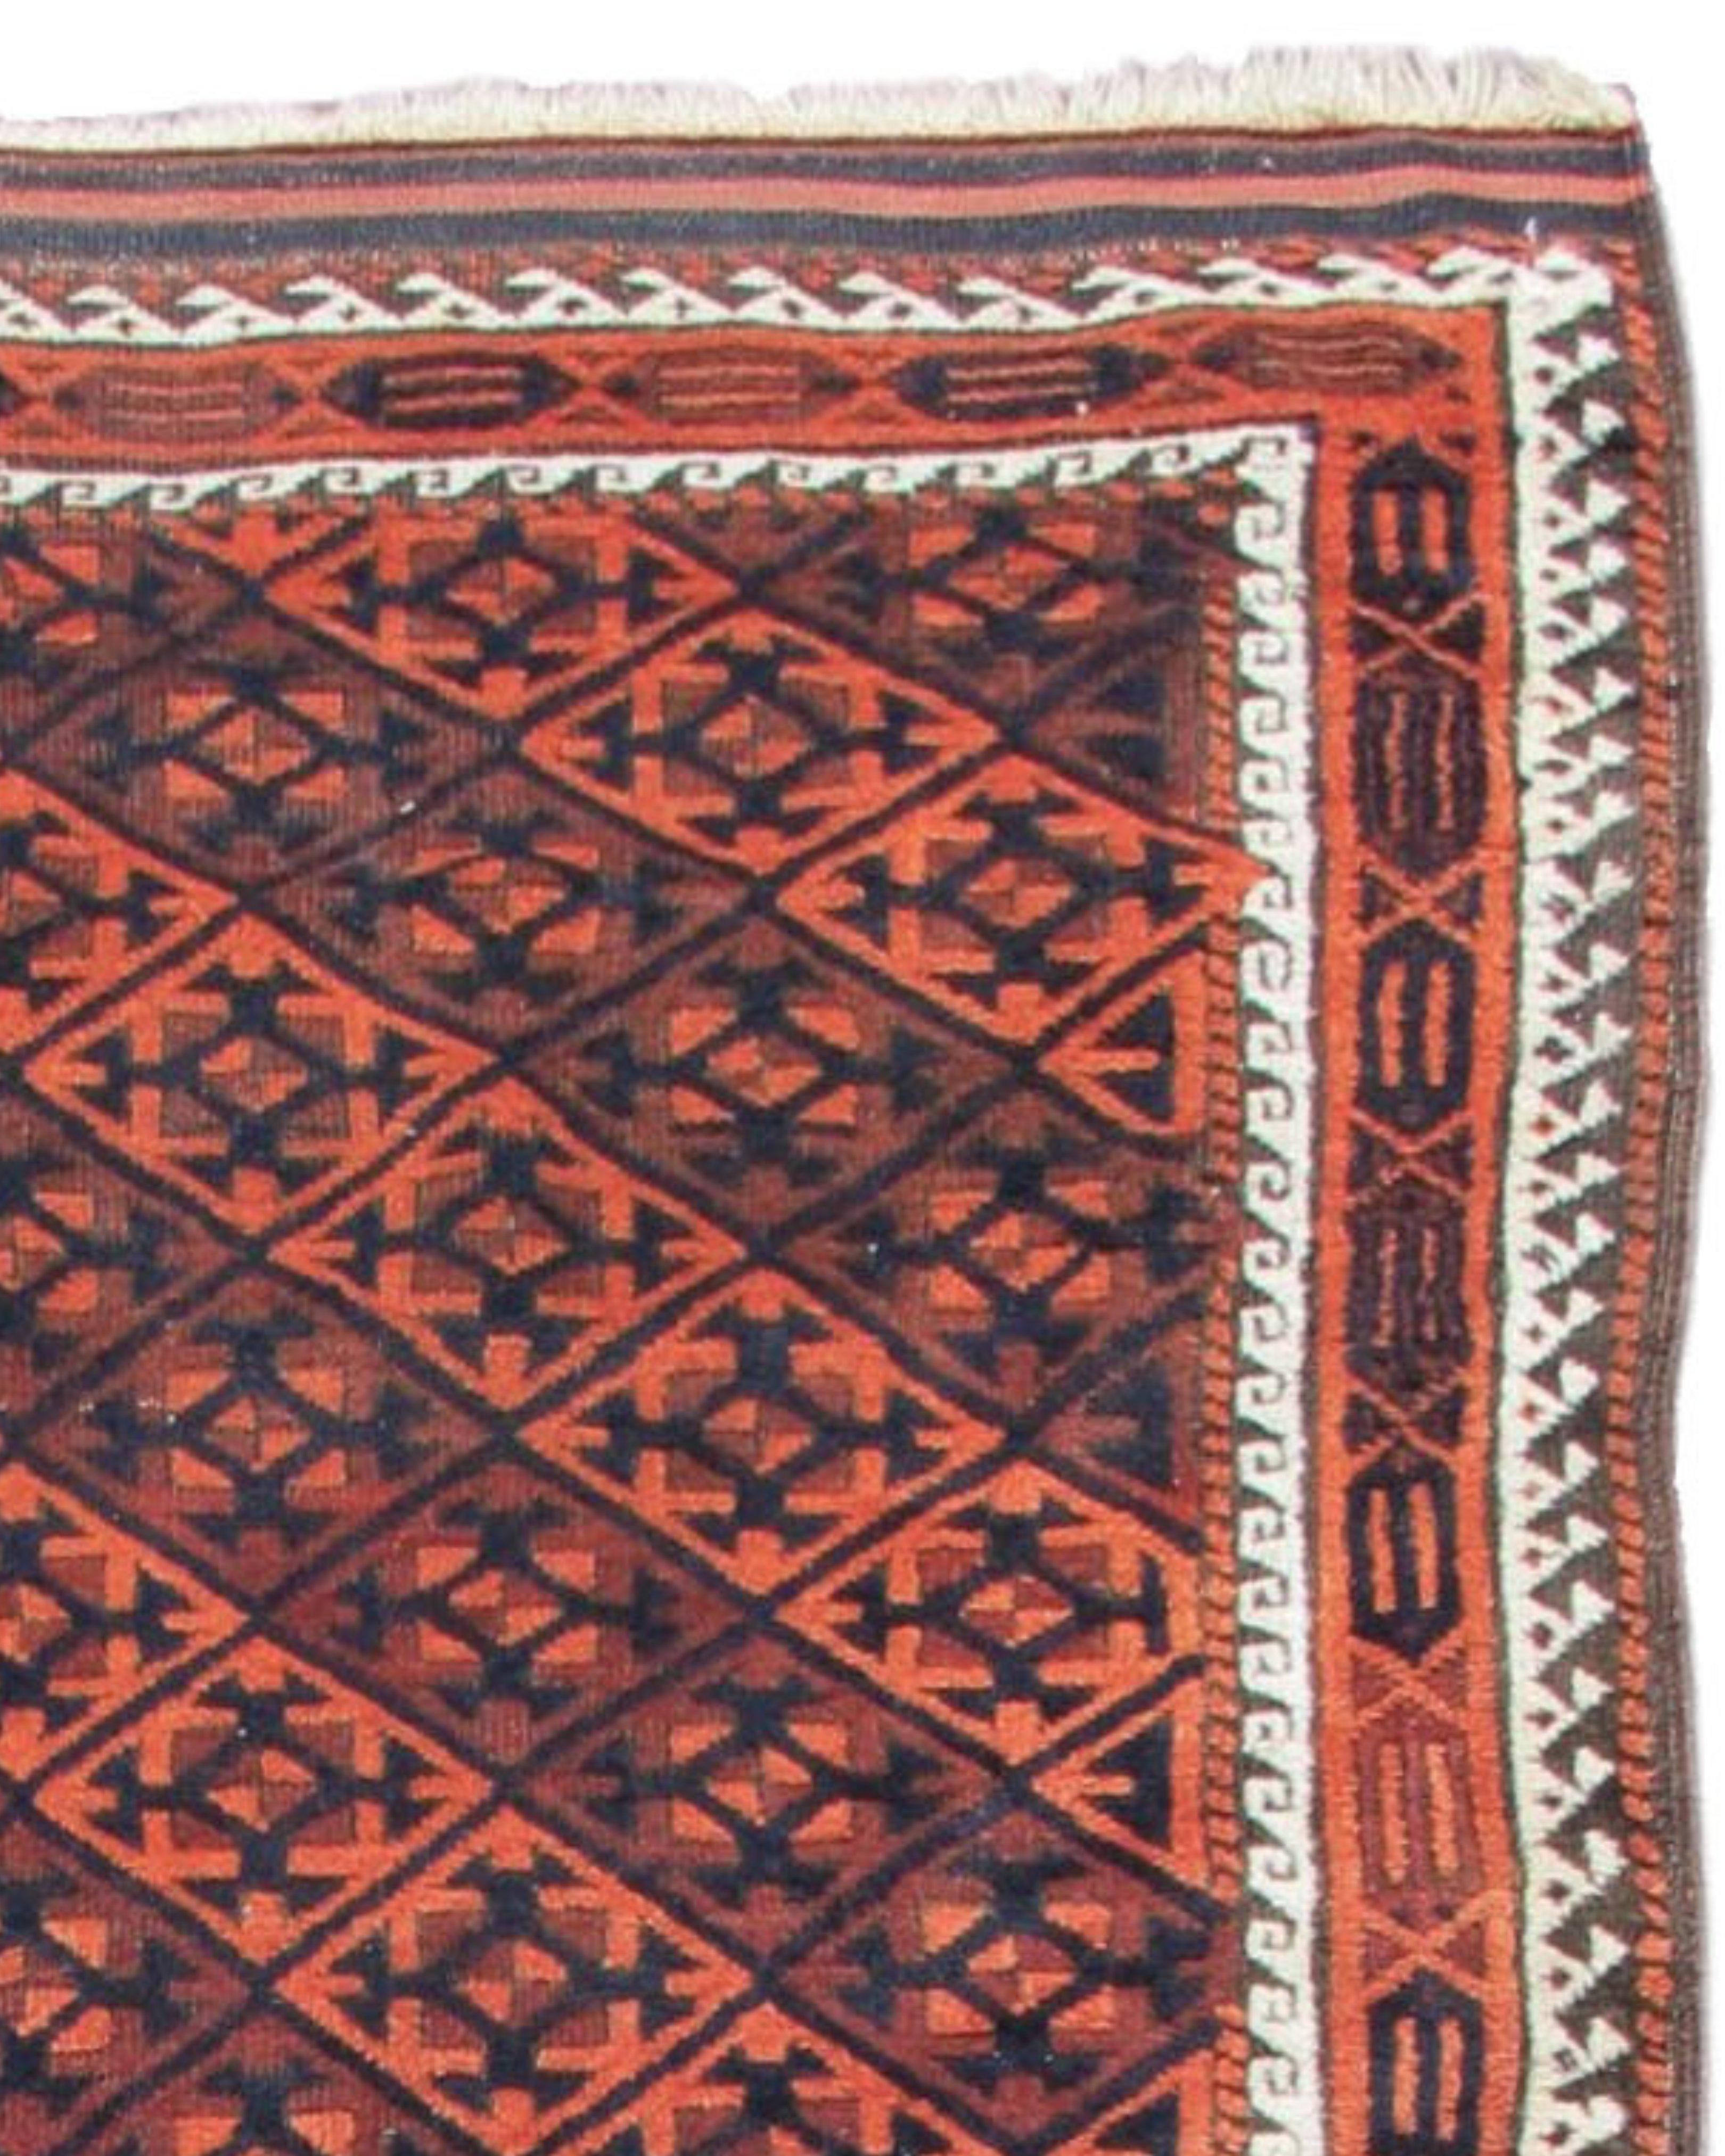 Baluch Rug, c. 1900

Additional Information:
Dimensions: 3'2